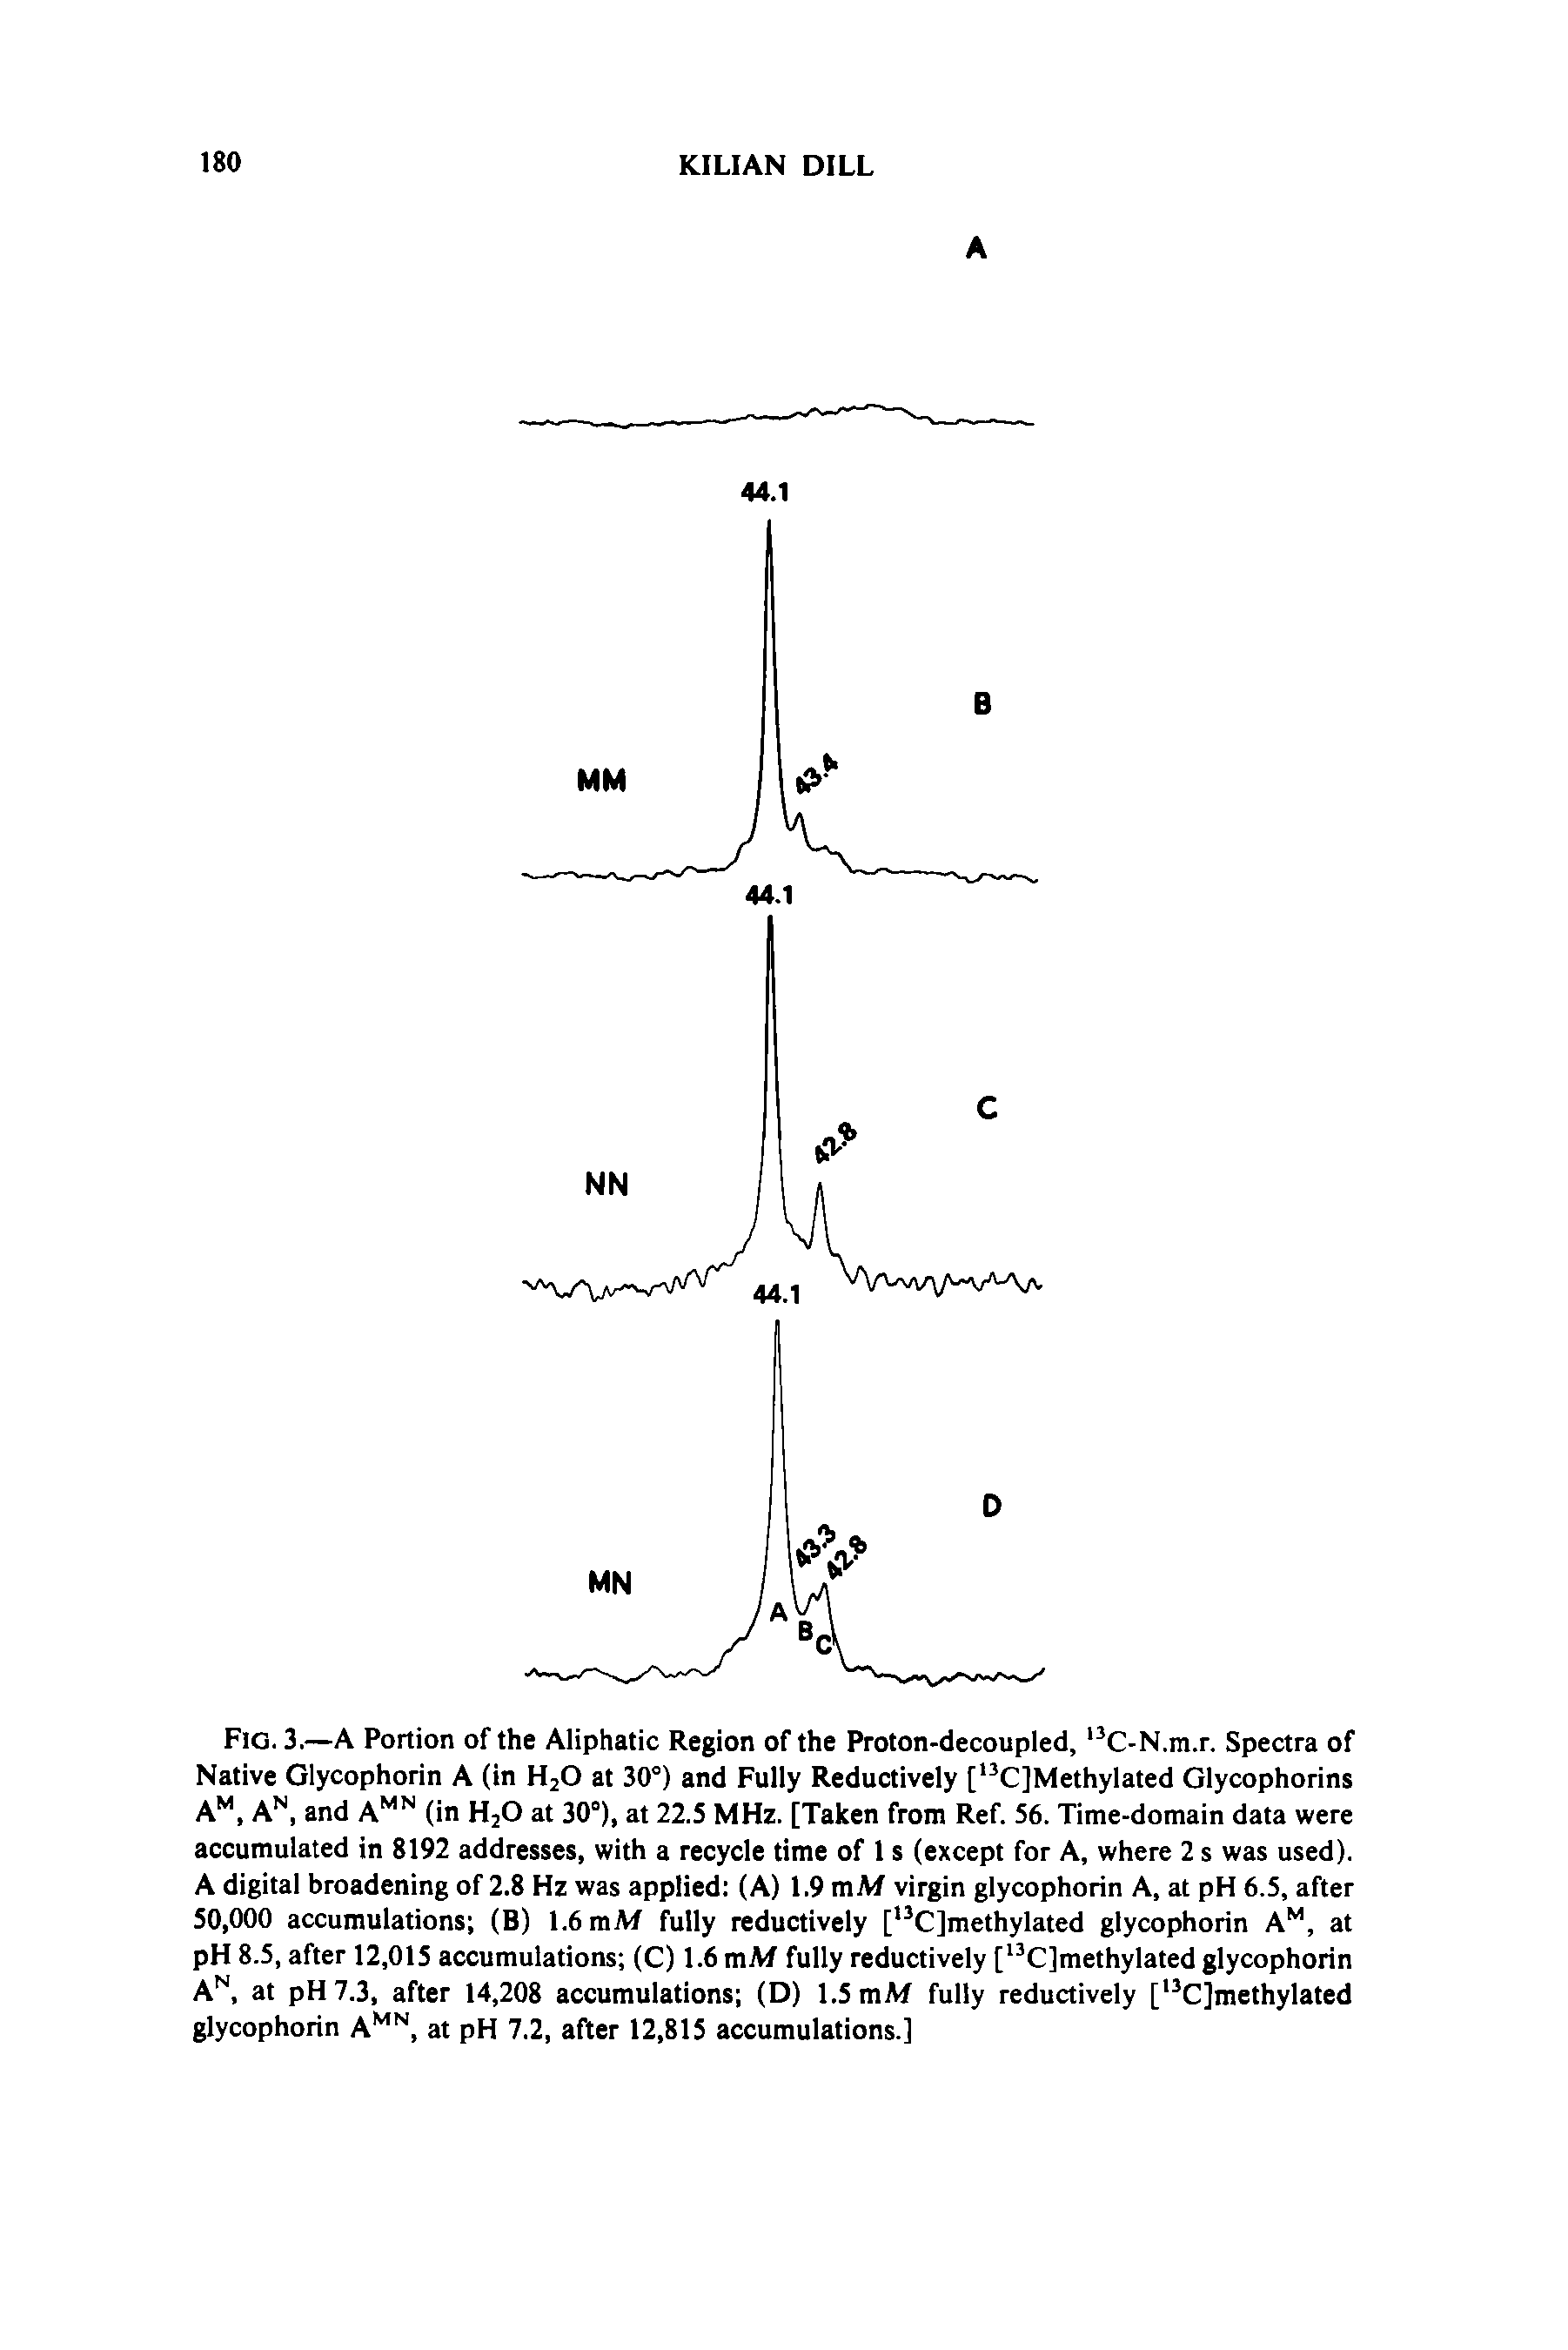 Fig. 3.—A Portion of the Aliphatic Region of the Proton-decoupled, C-N.m.r. Spectra of Native Glycophorin A (in HjO at 30°) and Fully Reductively [ C]Methylated Glycophorins A, A , and A (in H2O at 30°), at 22.5 MHz. [Taken from Ref. 56. Time-domain data were accumulated in 8192 addresses, with a recycle time of 1 s (except for A, where 2 s was used). A digital broadening of 2.8 Hz was applied (A) 1.9 mM virgin glycophorin A, at pH 6.5, after 50,000 accumulations (B) 1.6 mM fully reductively [ C]methylated glycophorin A , at pH 8.5, after 12,015 accumulations (C) 1.6 mM fully reductively [ C]methylated glycophorin A, at pH 7.3, after 14,208 accumulations (D) 1.5 mM fully reductively [ C]methylated glycophorin A °, at pH 7.2, after 12,815 accumulations.]...